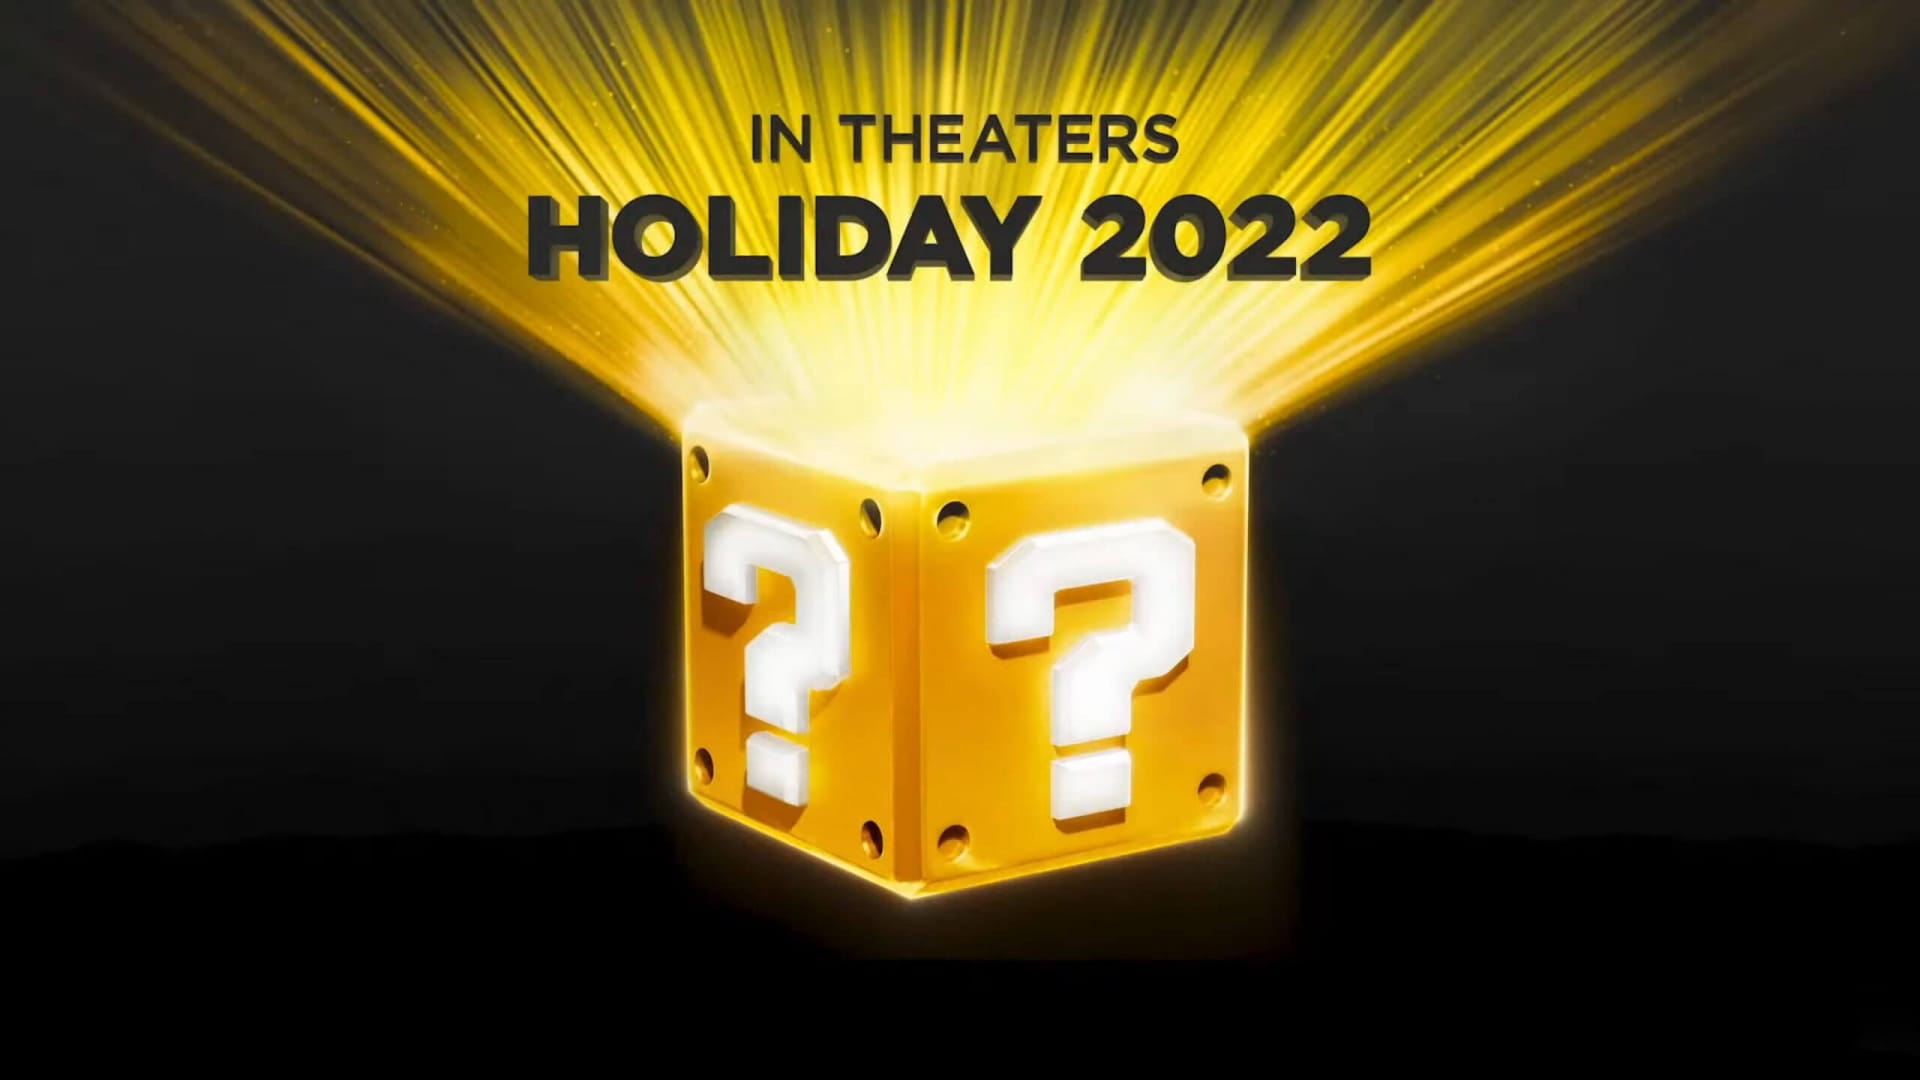 A question block image depicting the upcoming Super Mario Bros movie